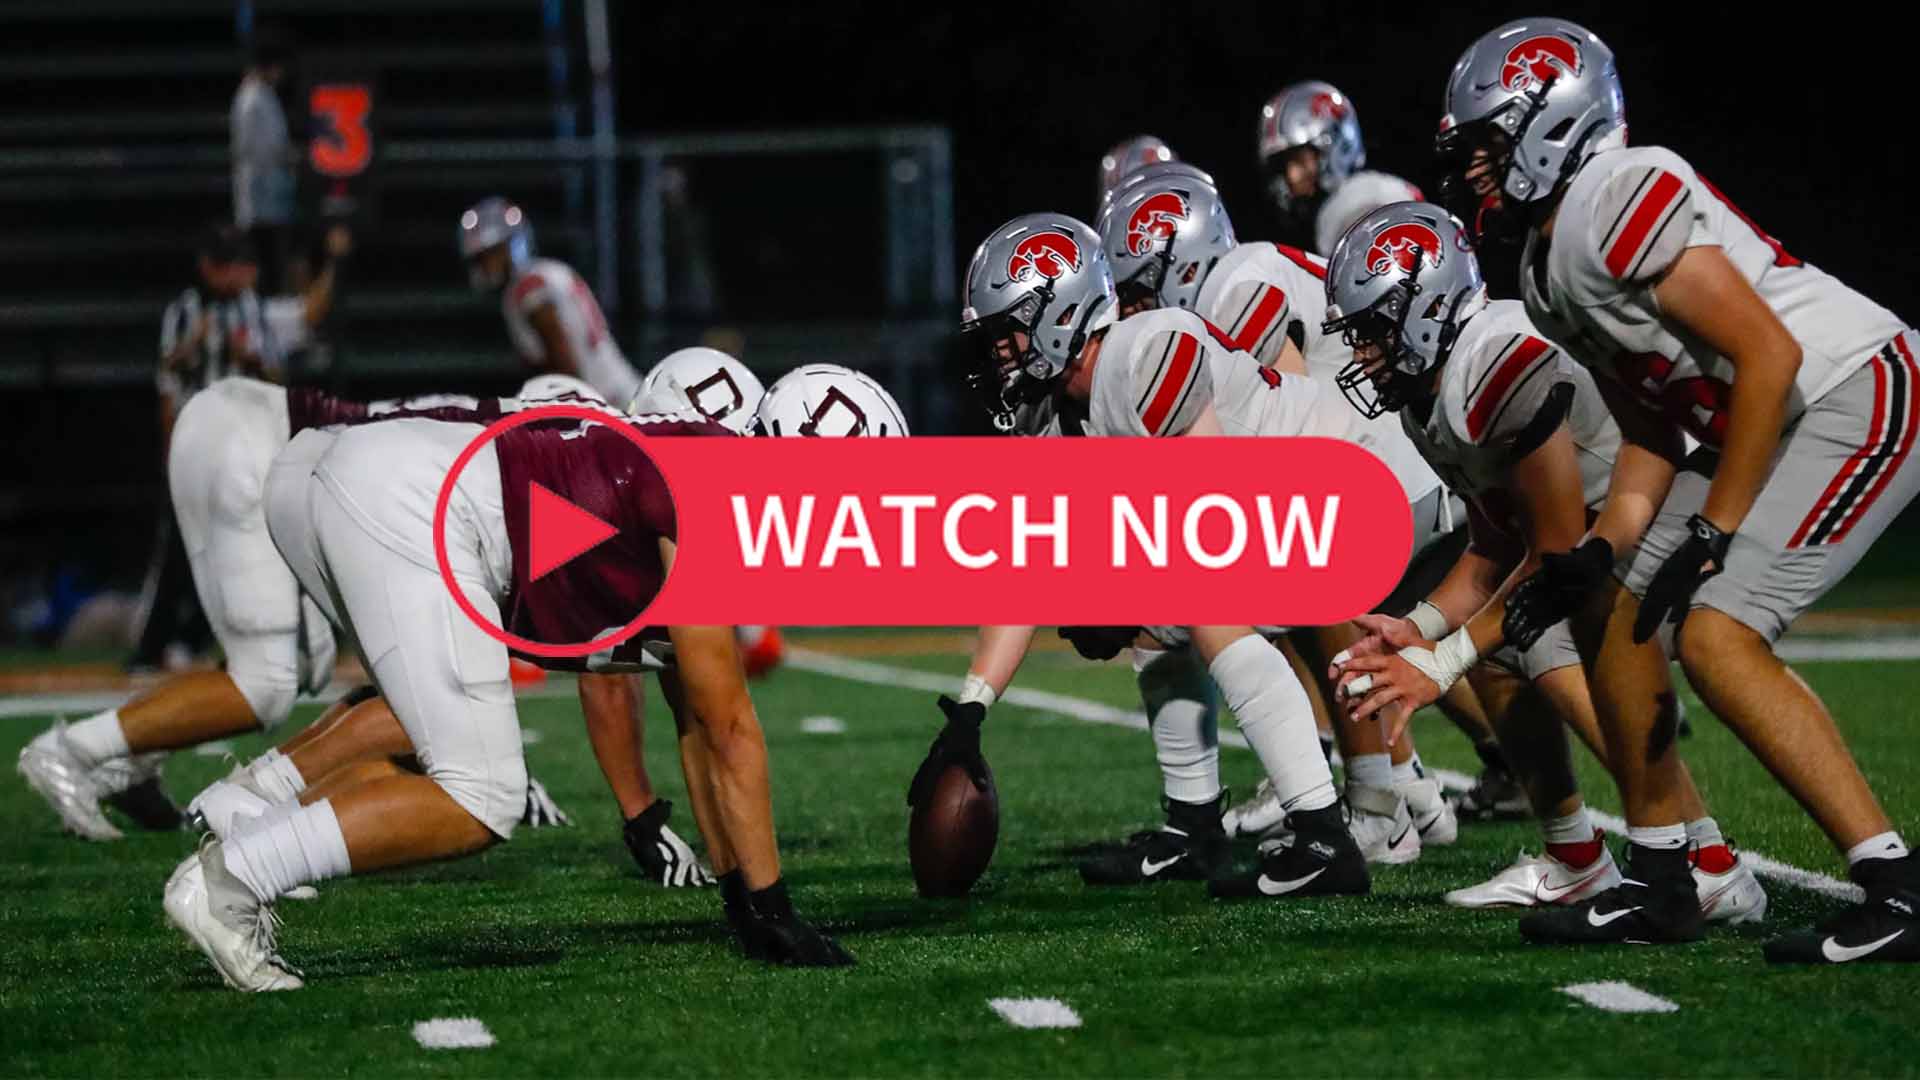  High School Football 2022 Live: Stream Every Game Now